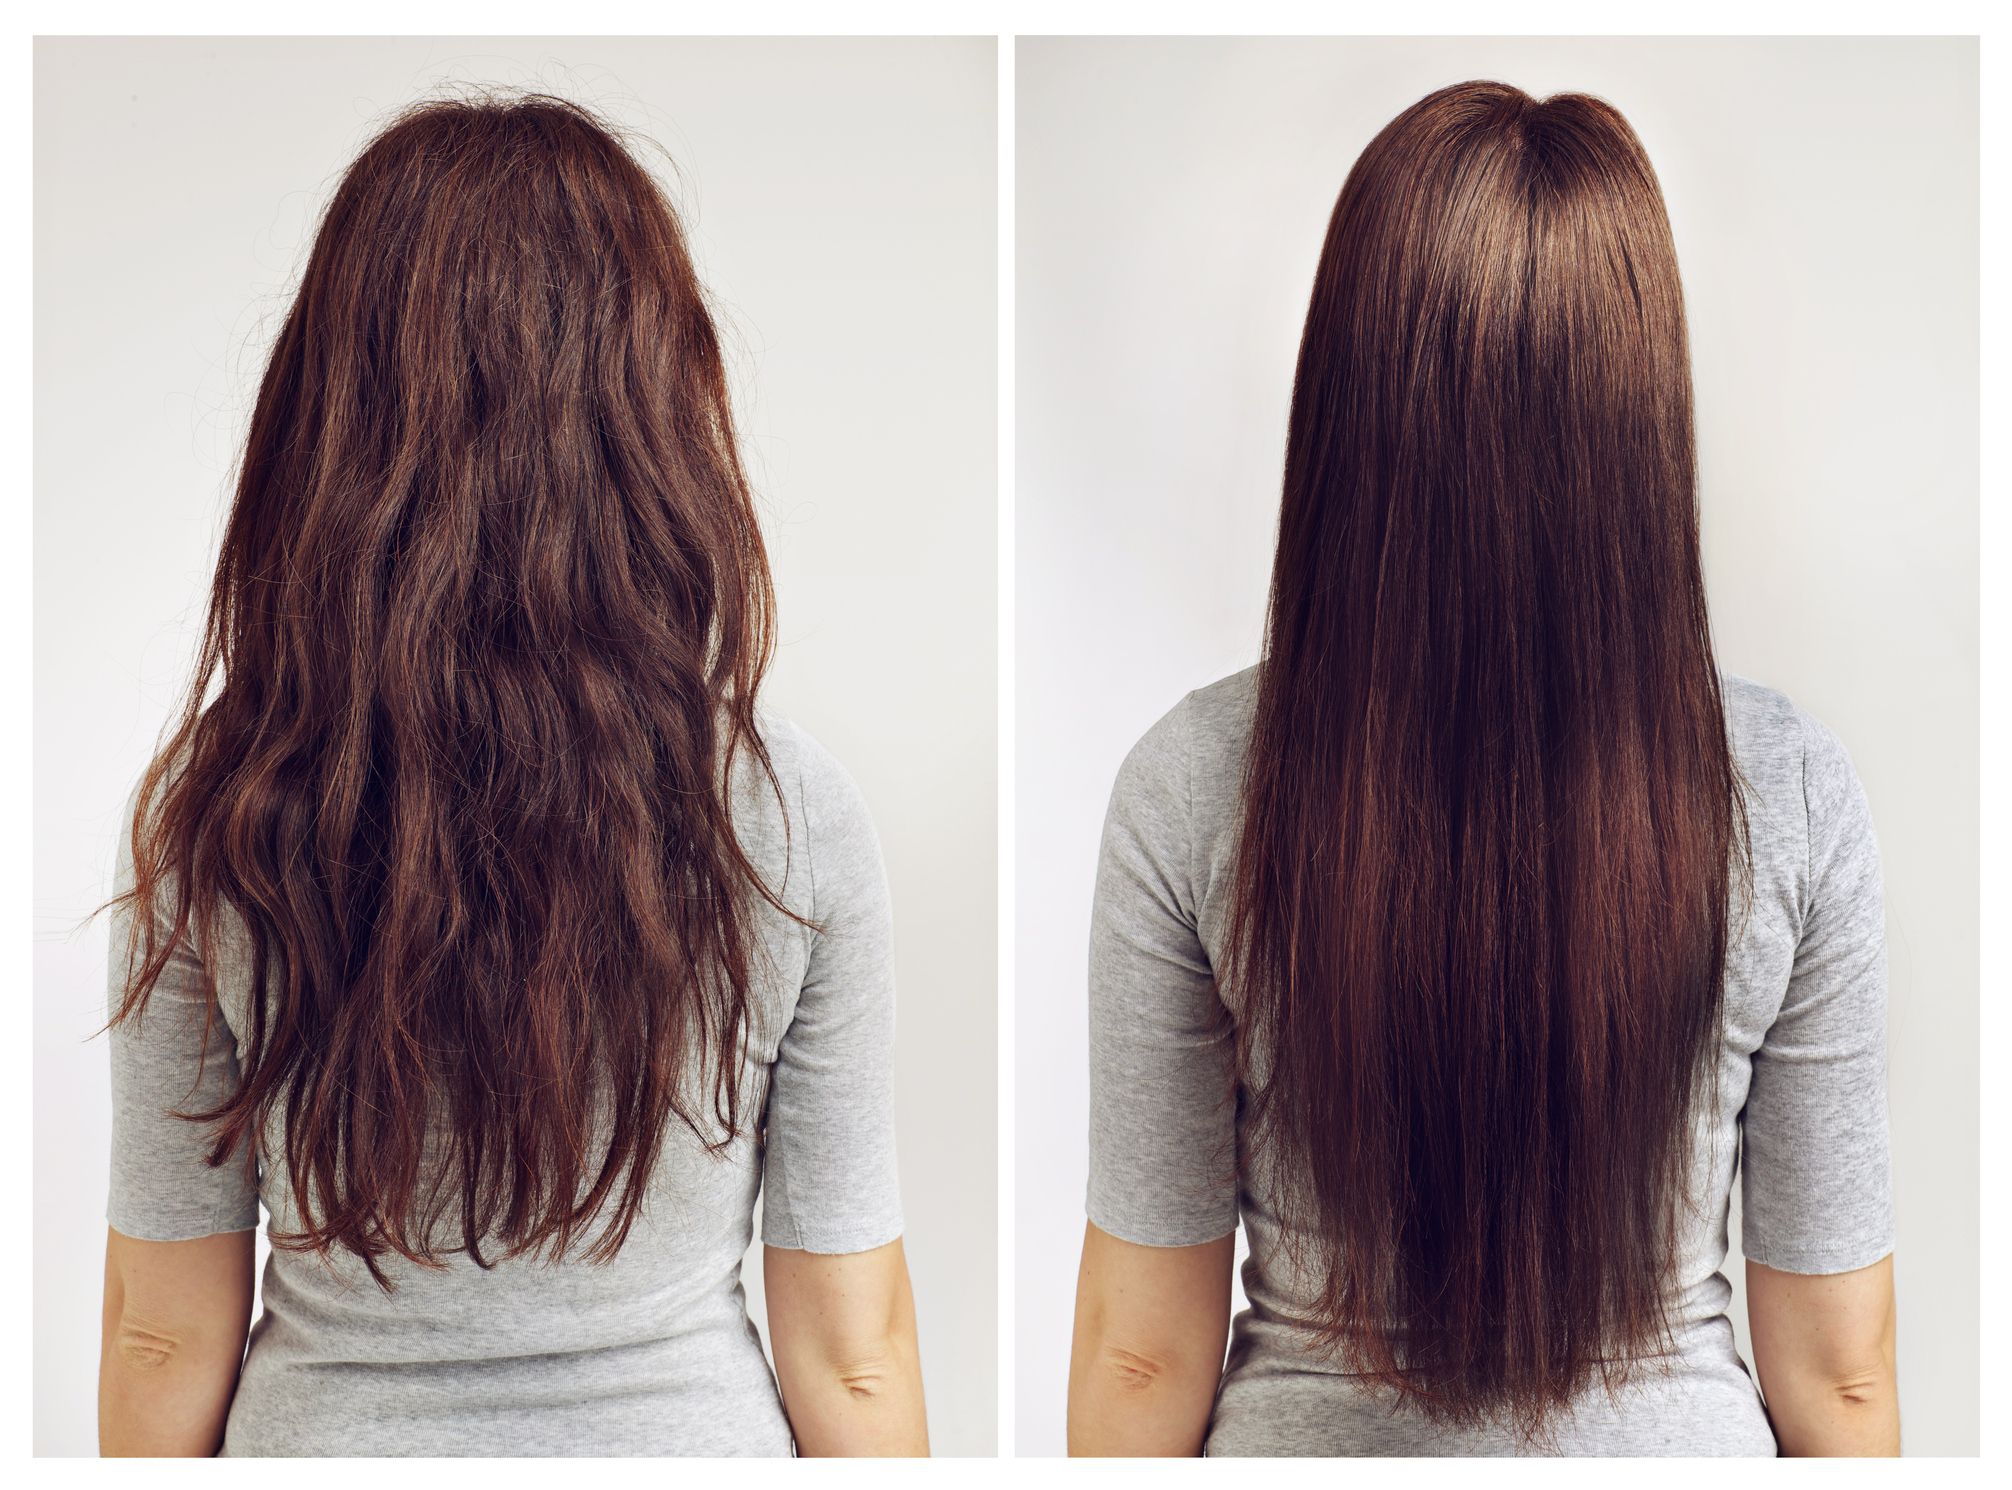 Hair Straightening Tricks That Can Last For Days